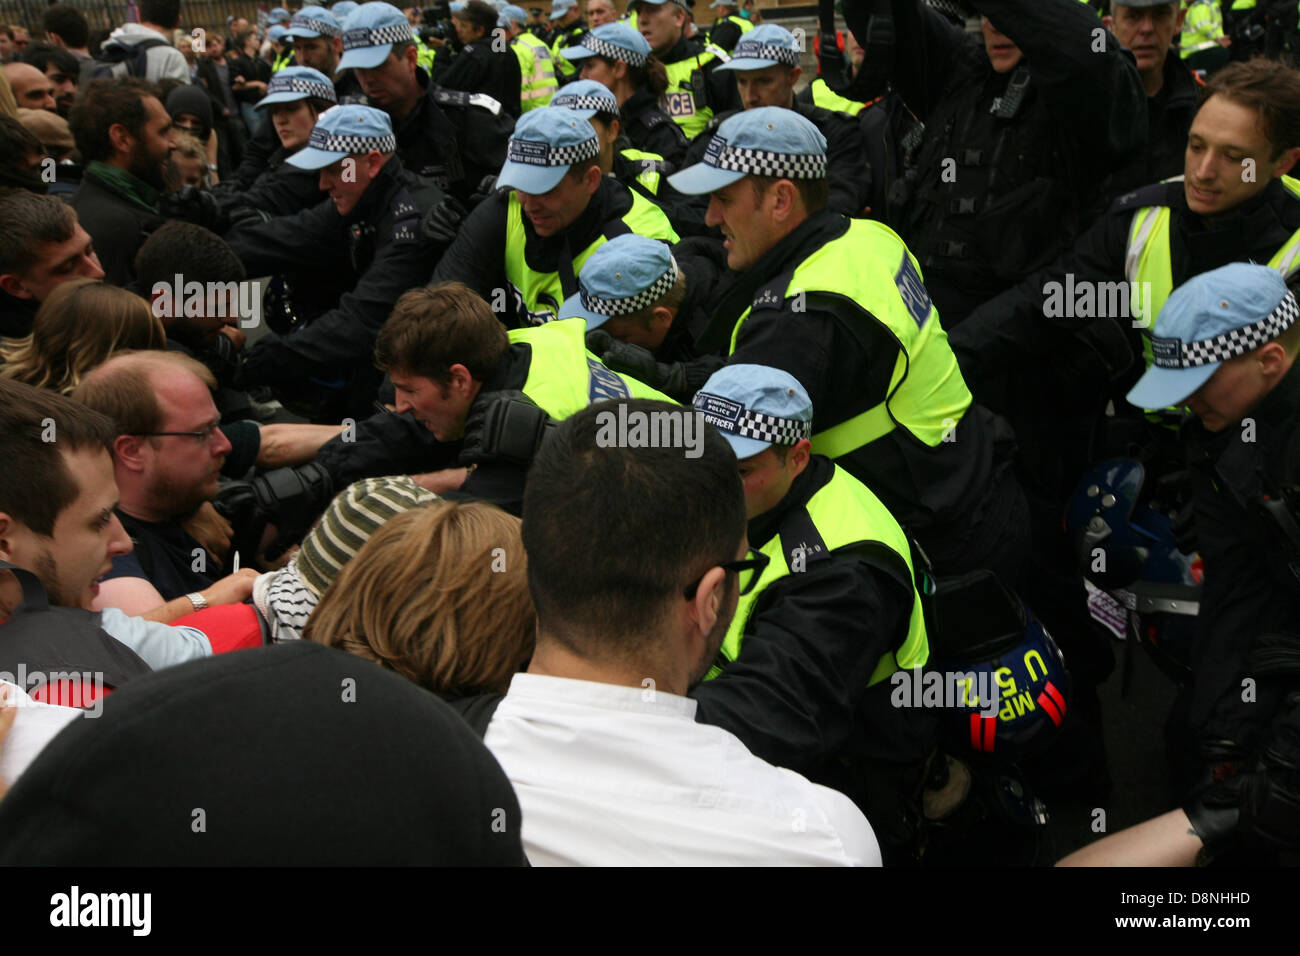 London, UK. 1st June, 2013. Scuffles between anti-fascist protesters and police after a BNP march was stopped. The protesters were trying to get to the BNP section behind the police.  Credit:  Mario Mitsis / Alamy Live News Stock Photo